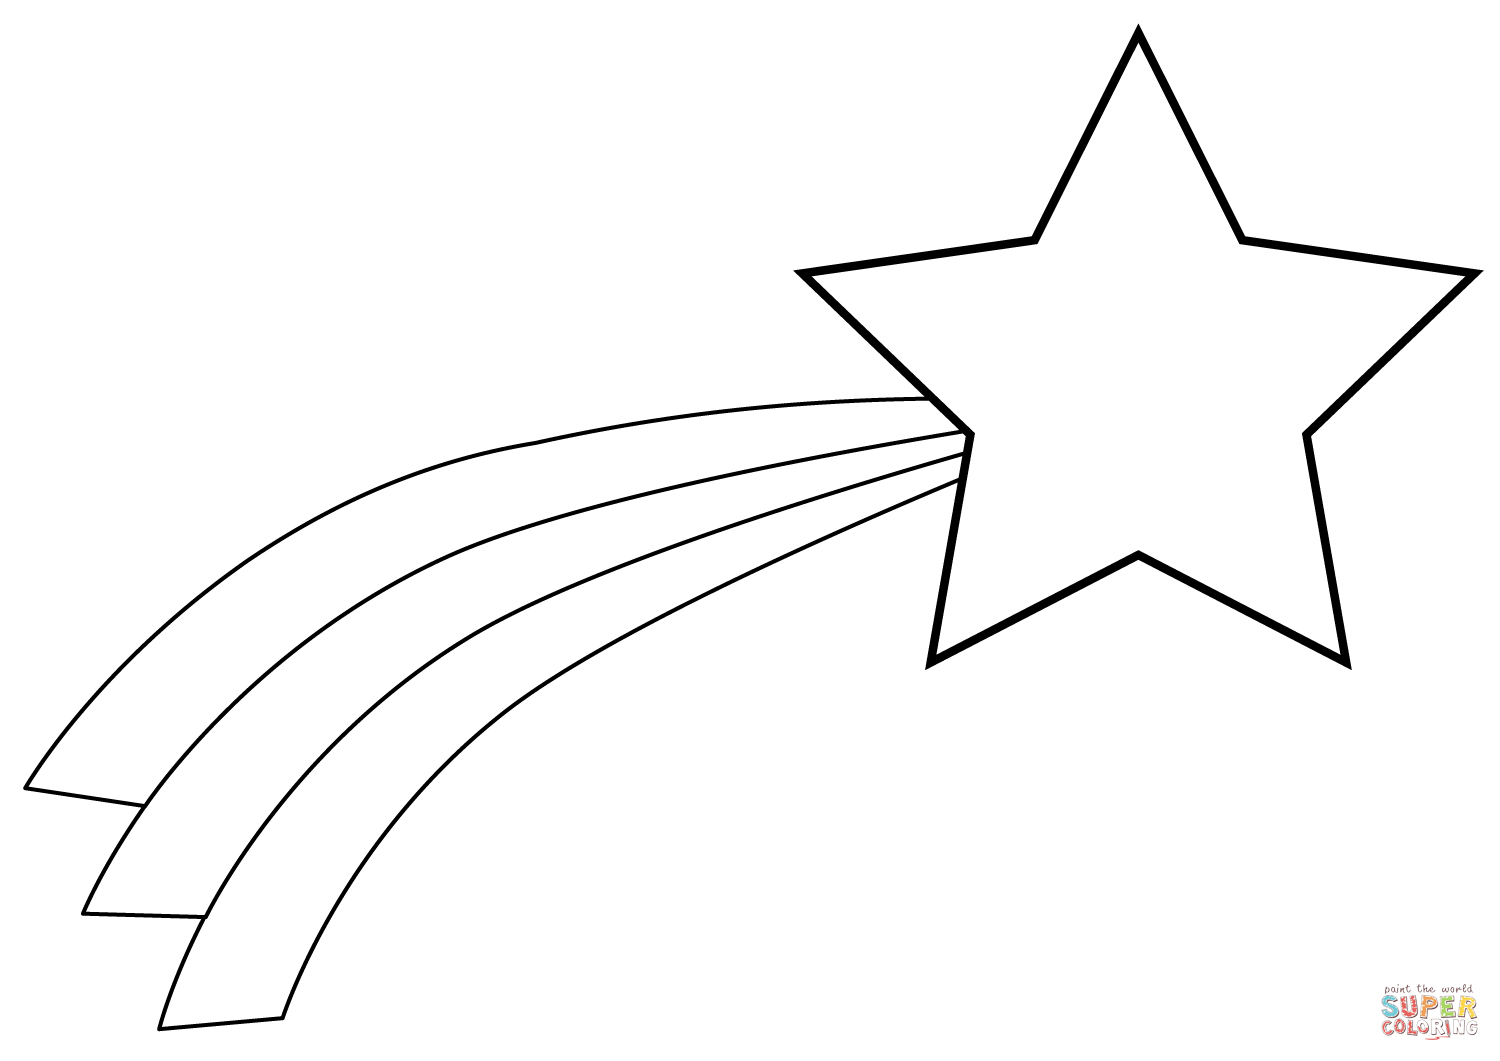 Christmas Shooting Star Coloring Page | Free Printable Coloring Pages - Free Printable Christmas Star Coloring Pages